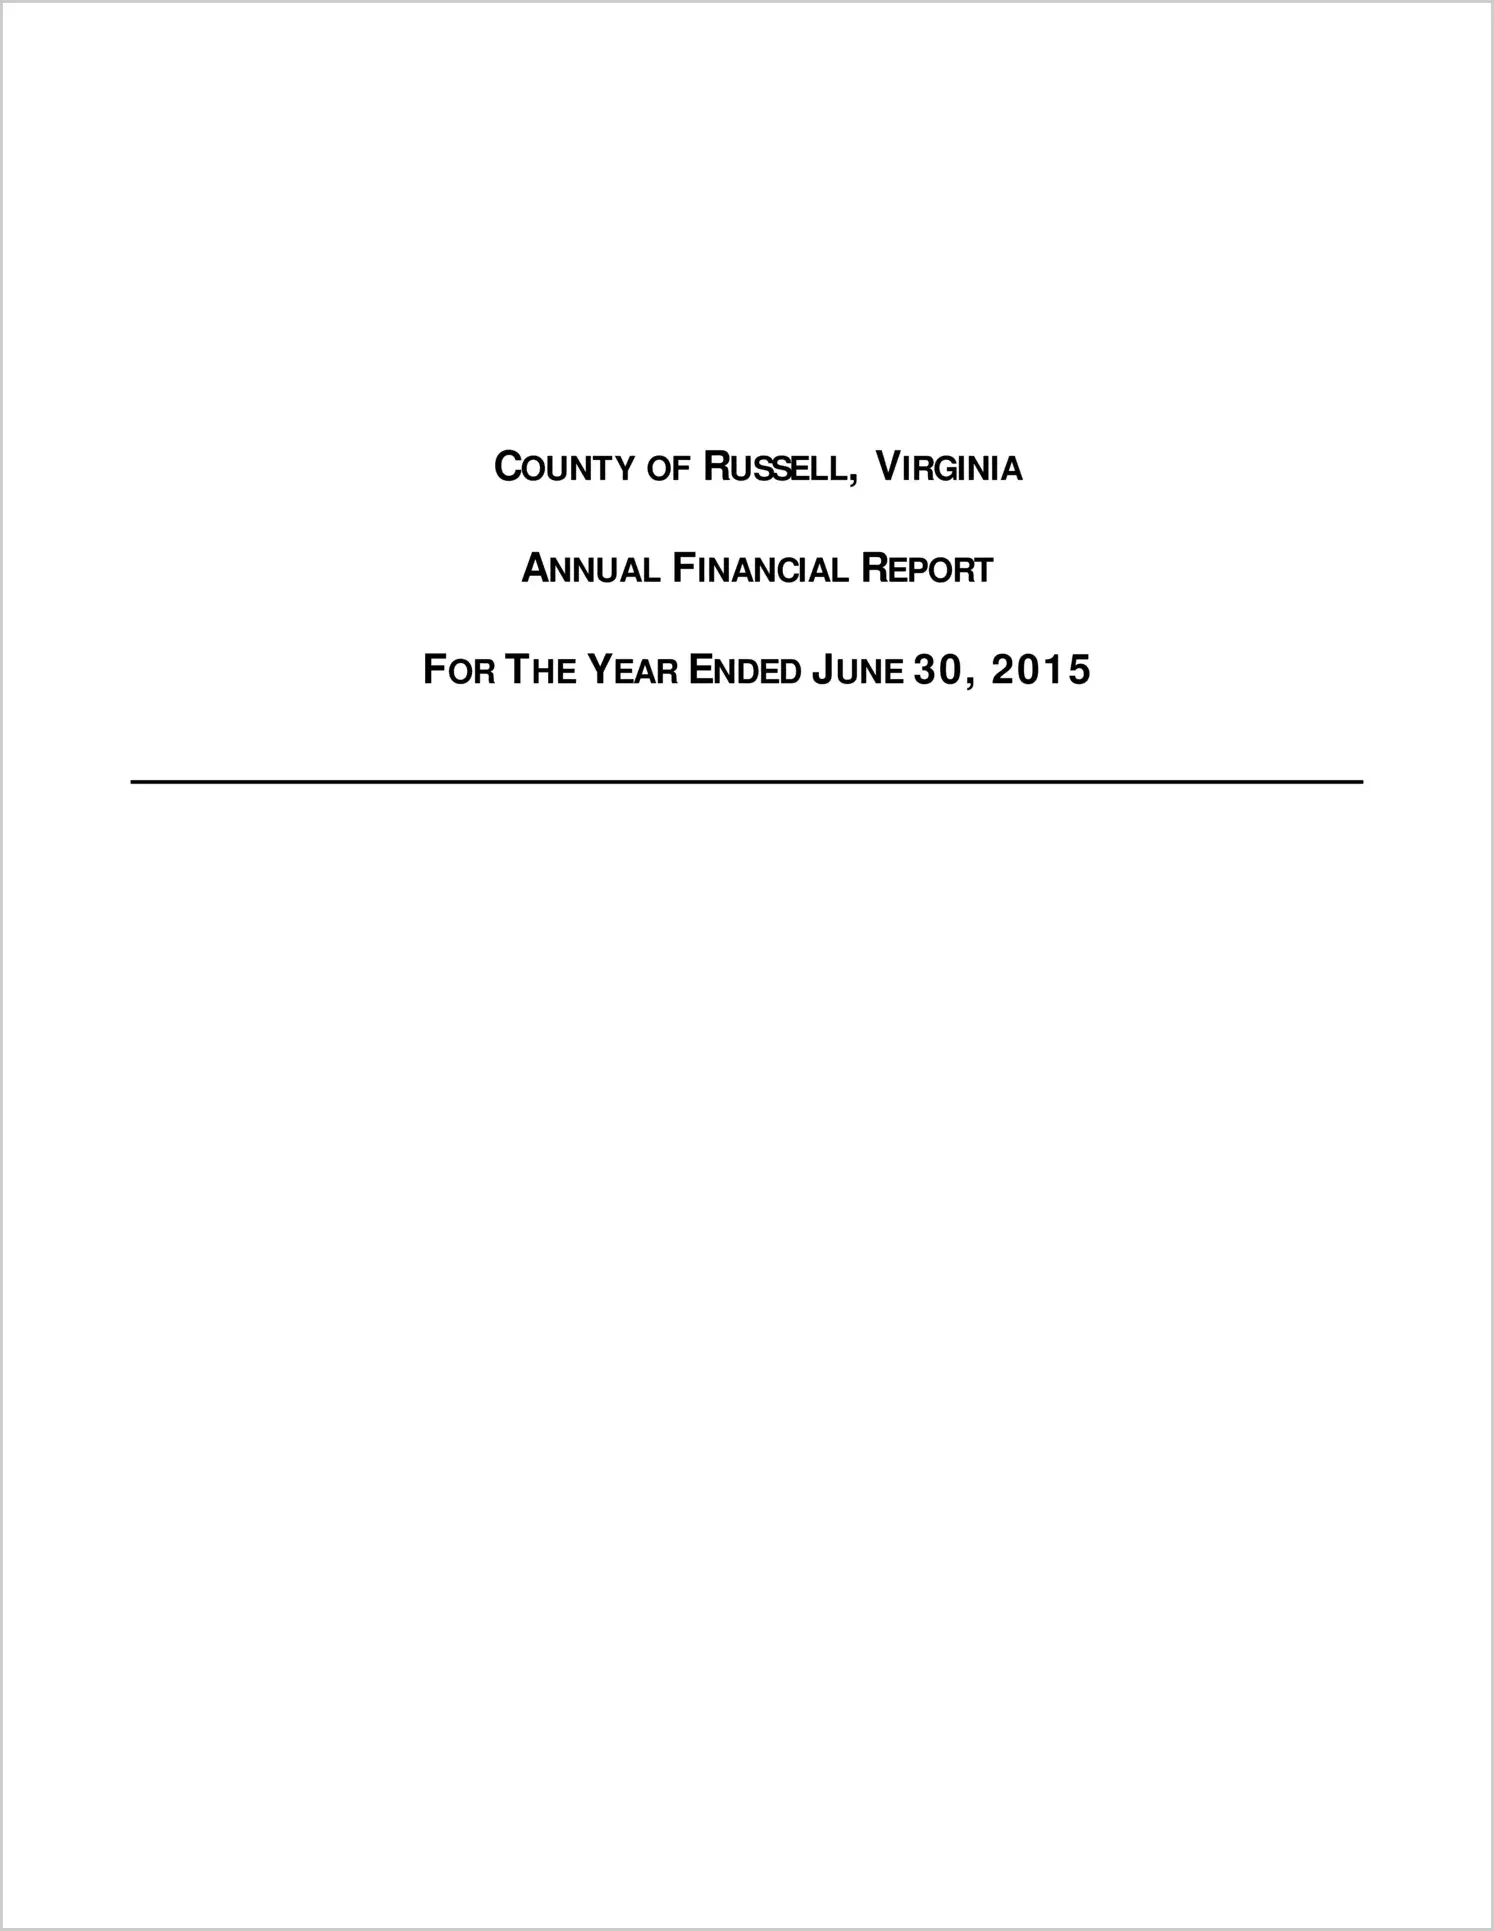 2015 Annual Financial Report for County of Russell